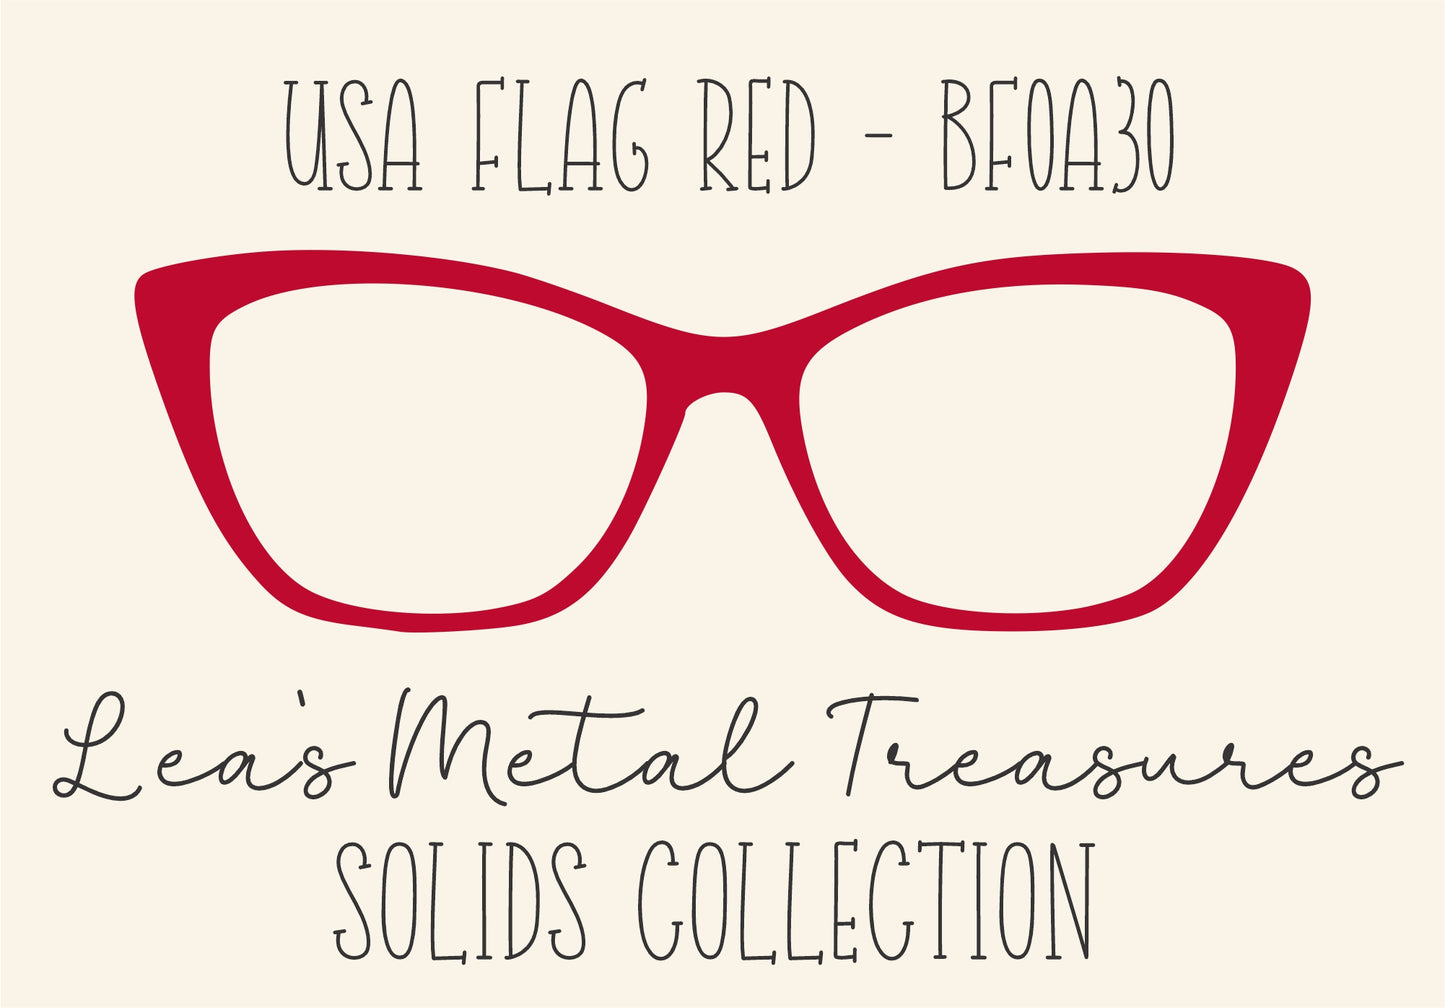 USA FLAG RED BF0A30 Eyewear Frame Toppers COMES WITH MAGNETS